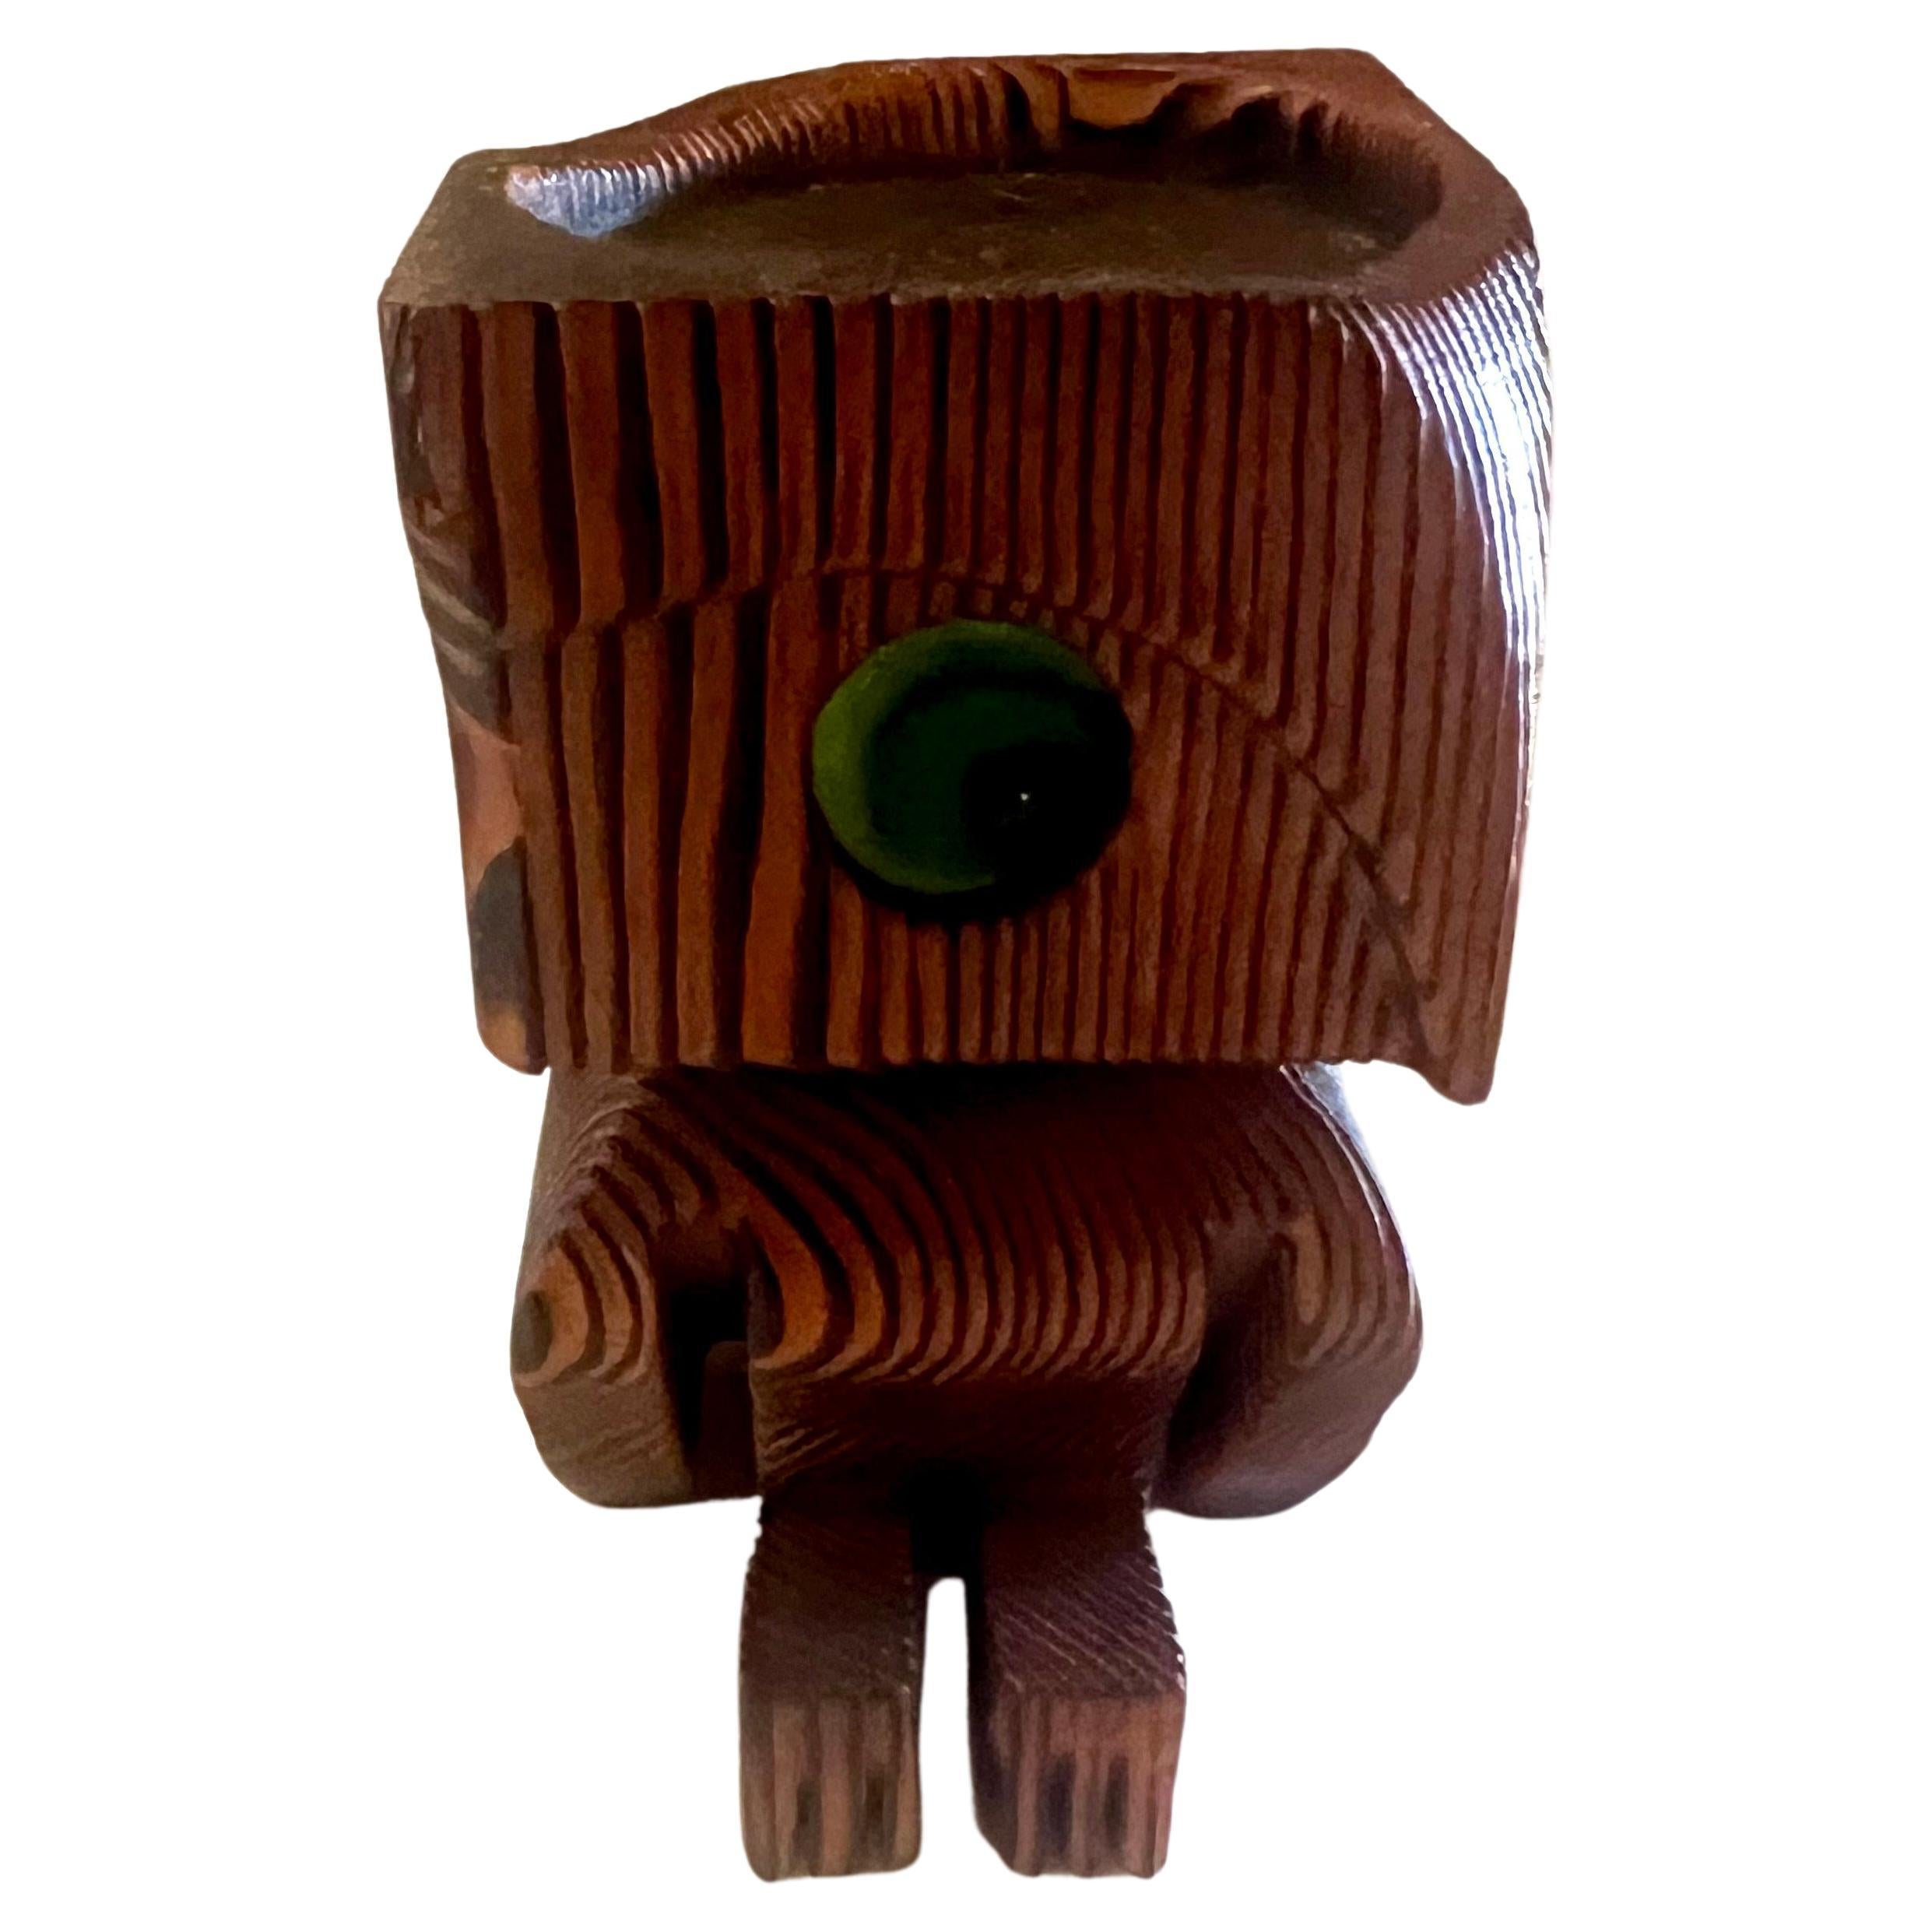 whimsical wood carved owl circa 1970's with burn wood finish with a 3